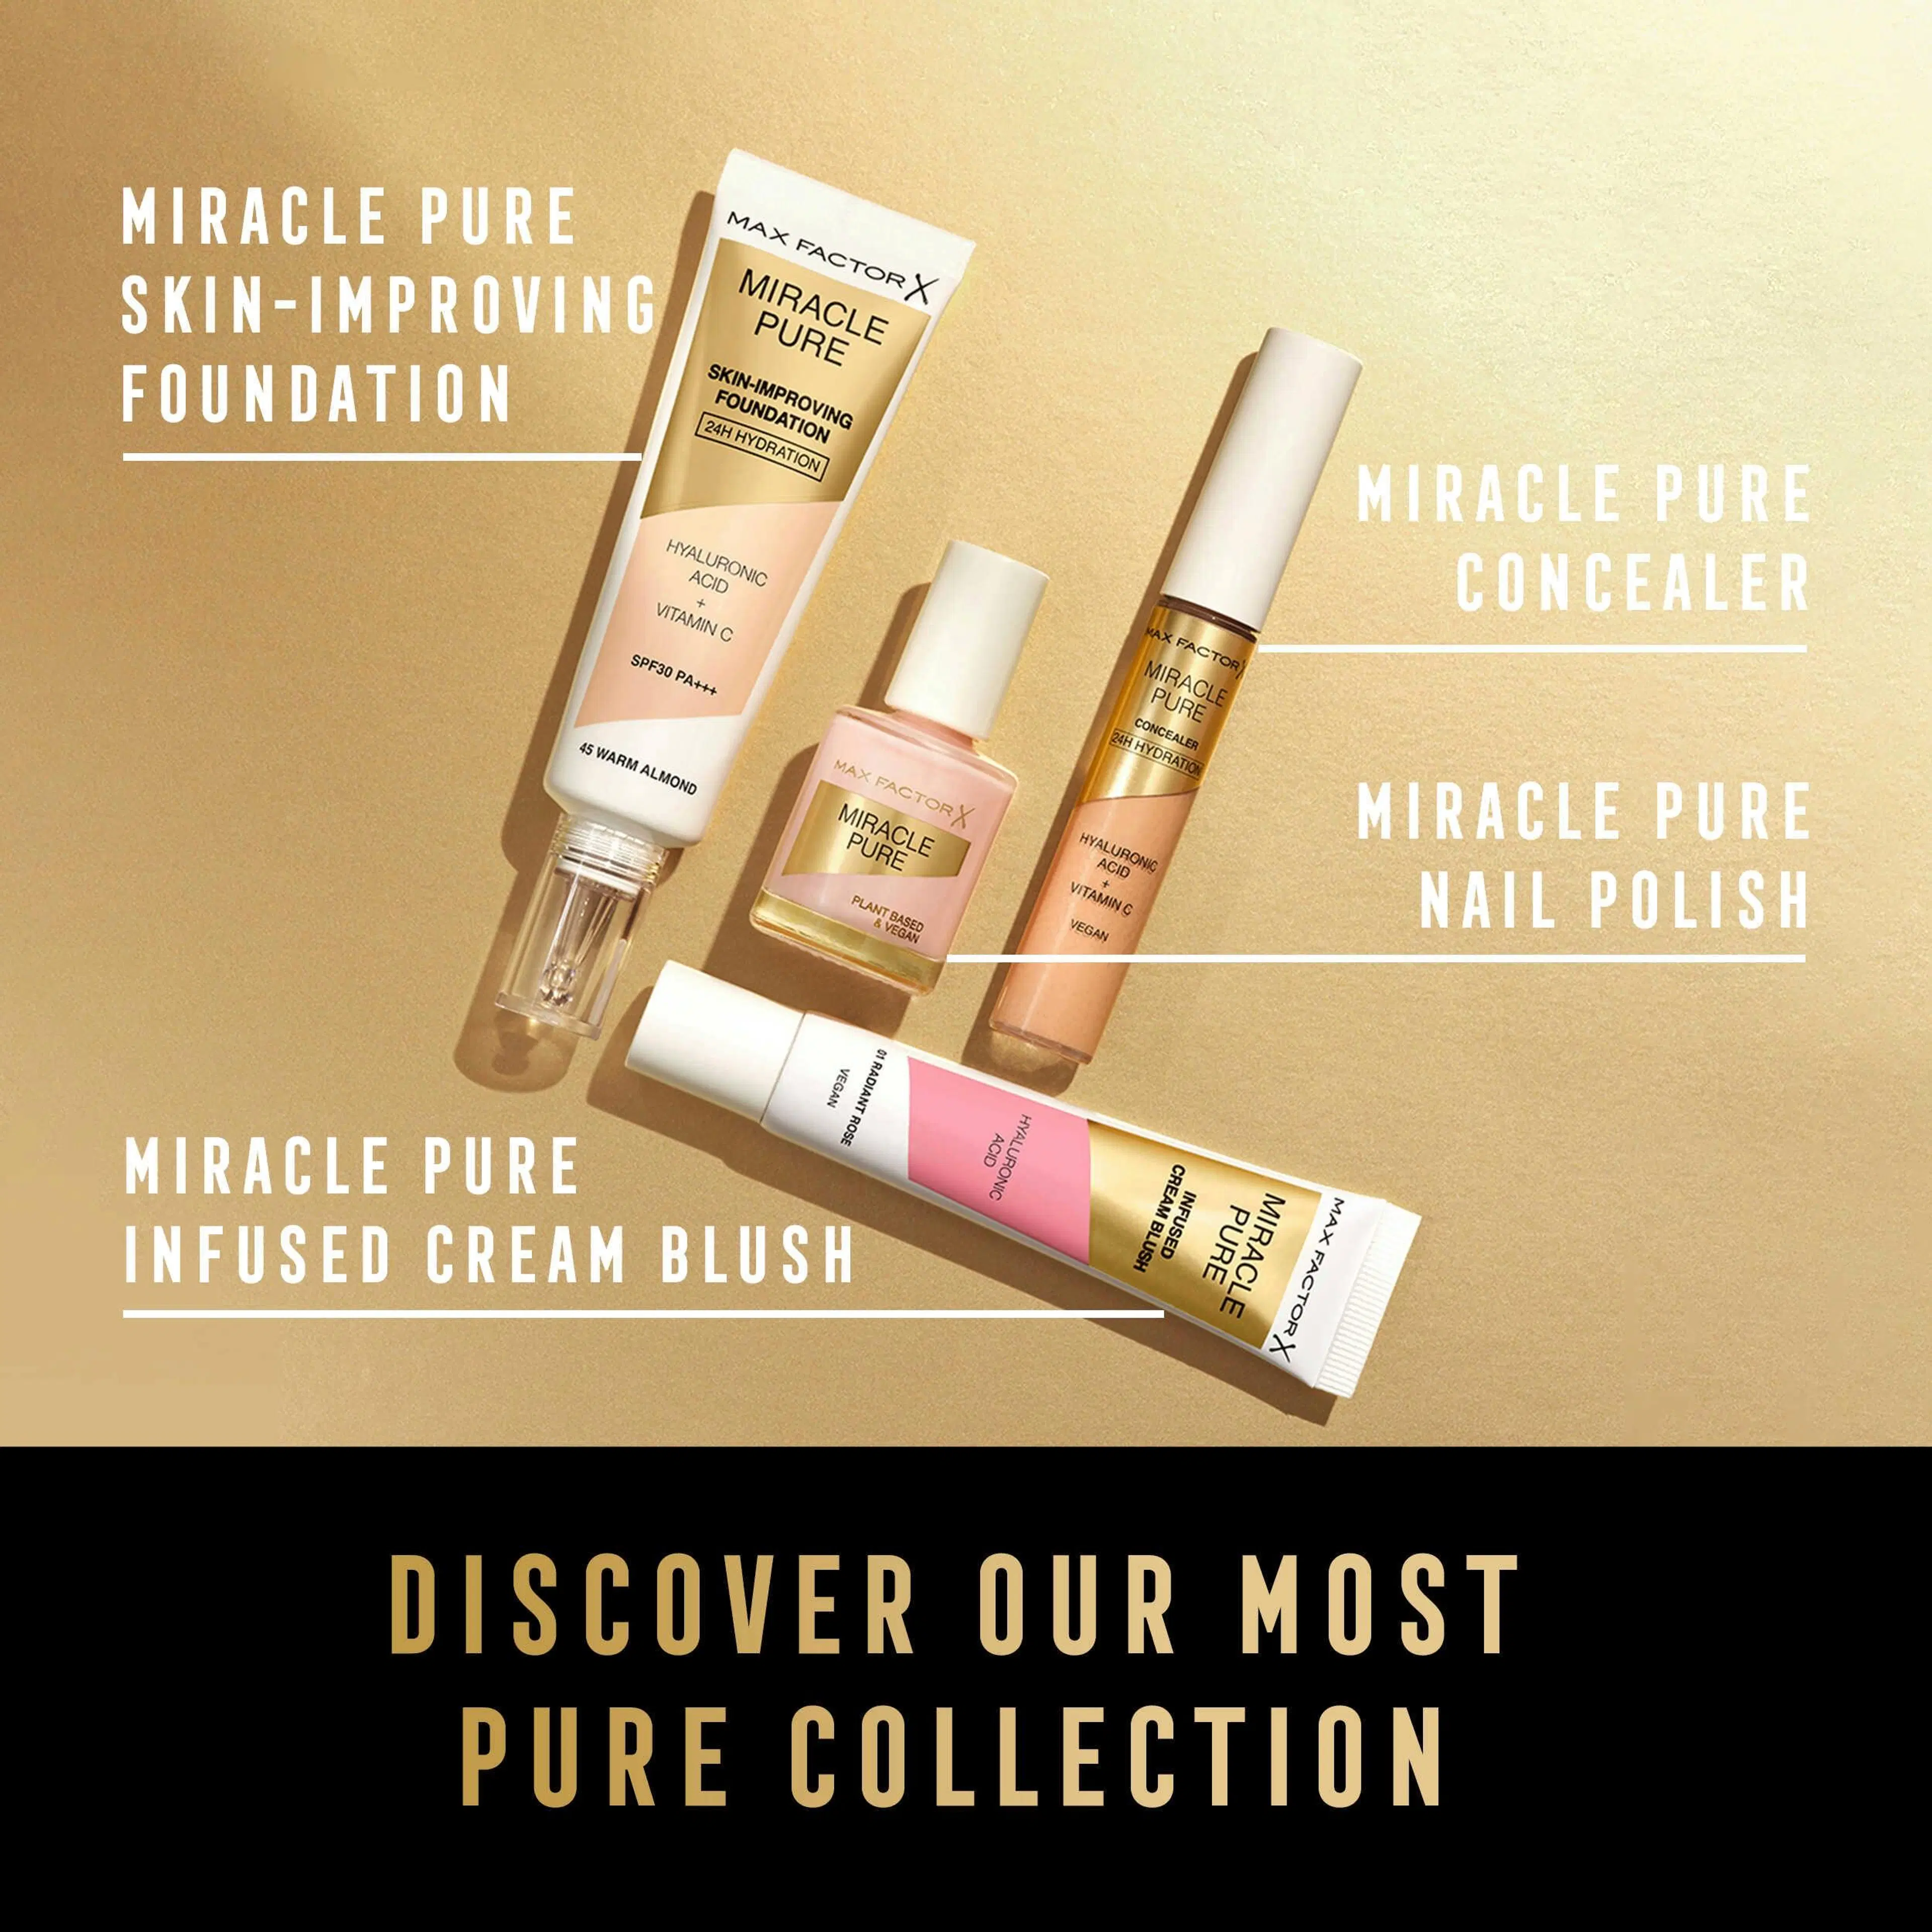 Max Factor Miracle Pure Foundation 55 Beige 30 ml